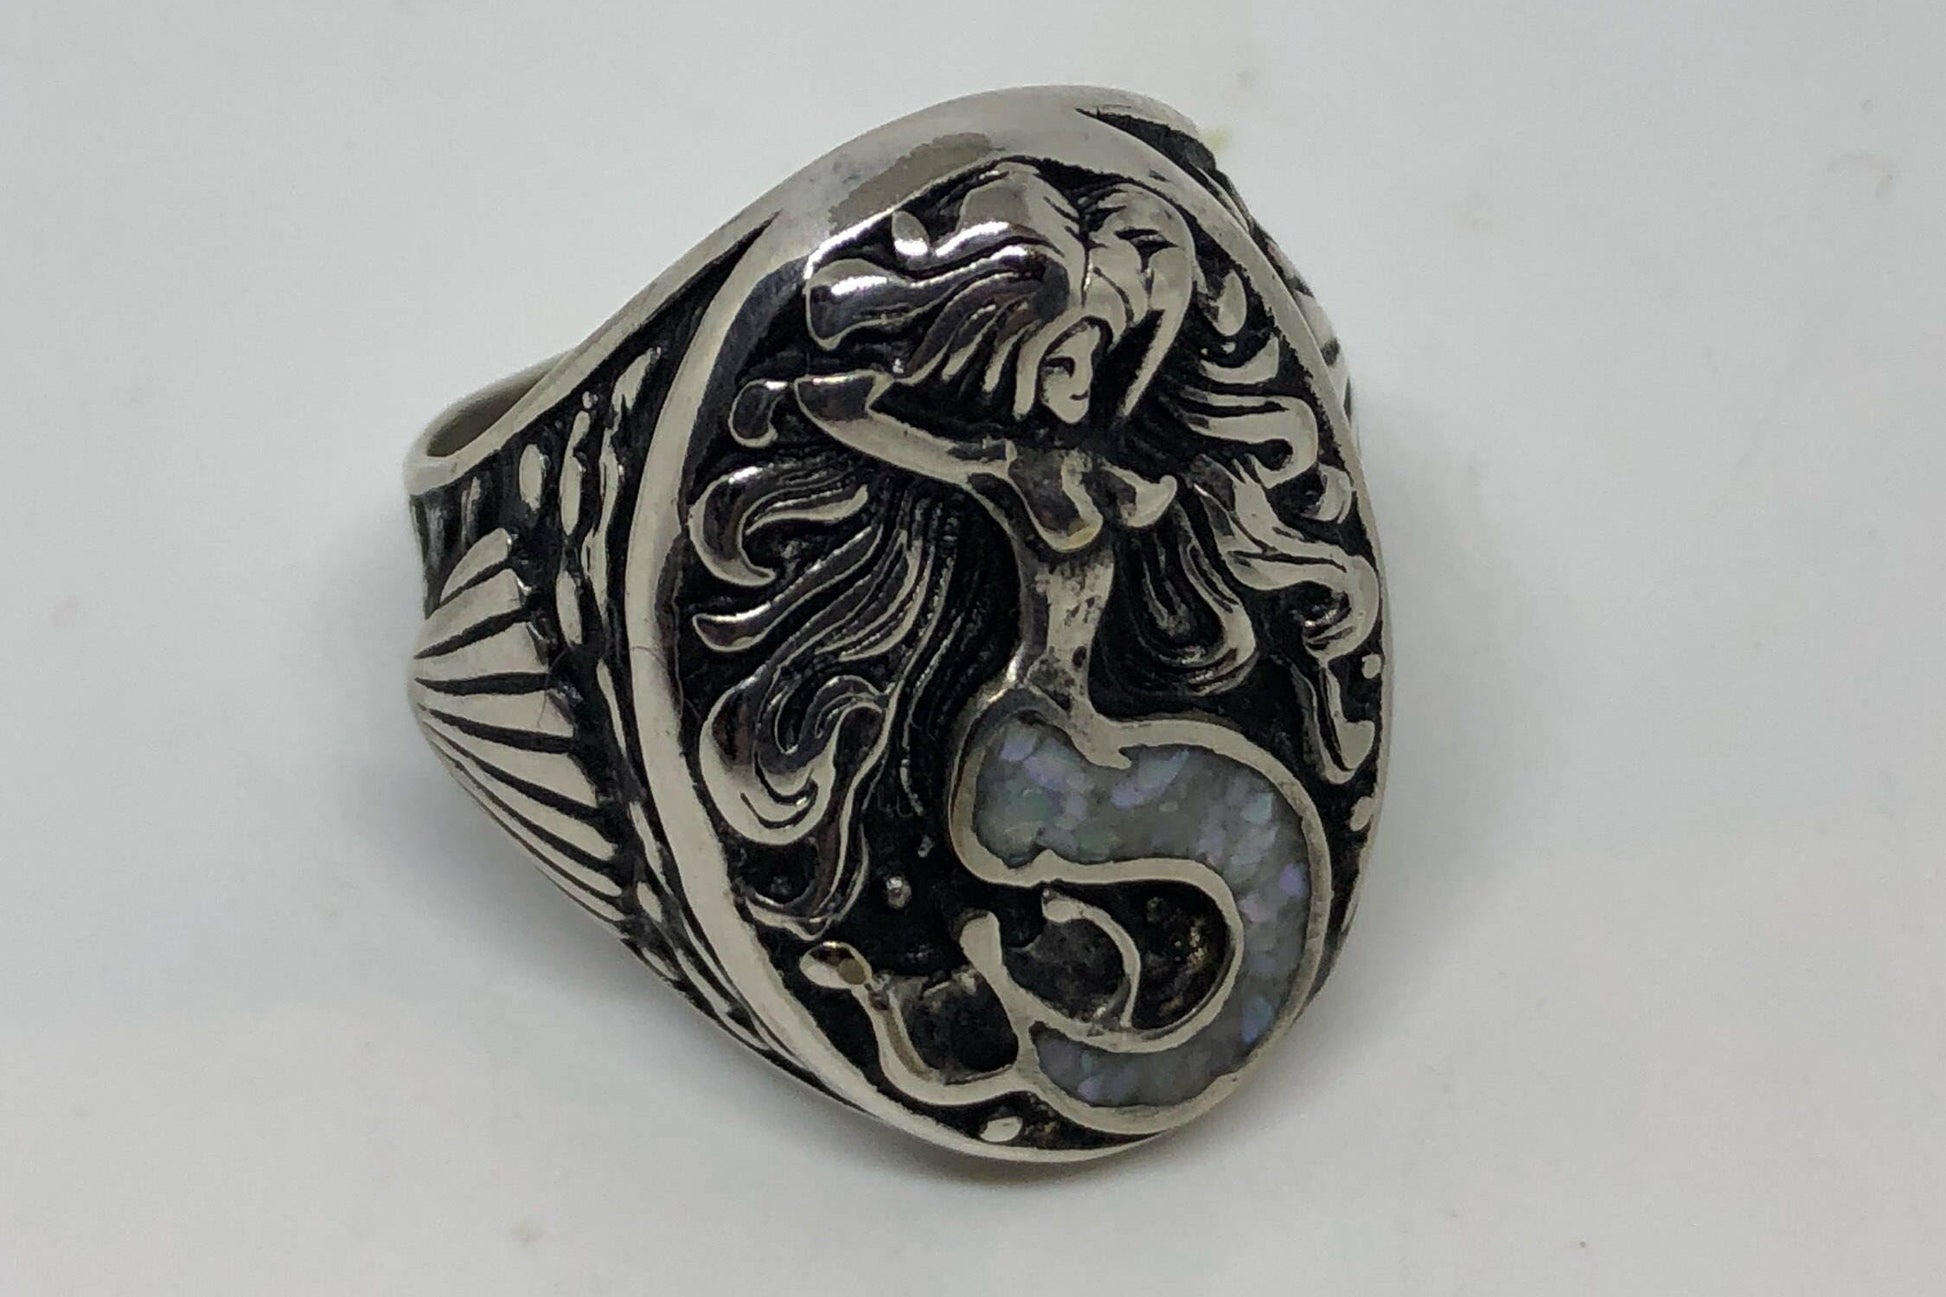 Mermaid ring with white mother of pearl inlay in white bronze